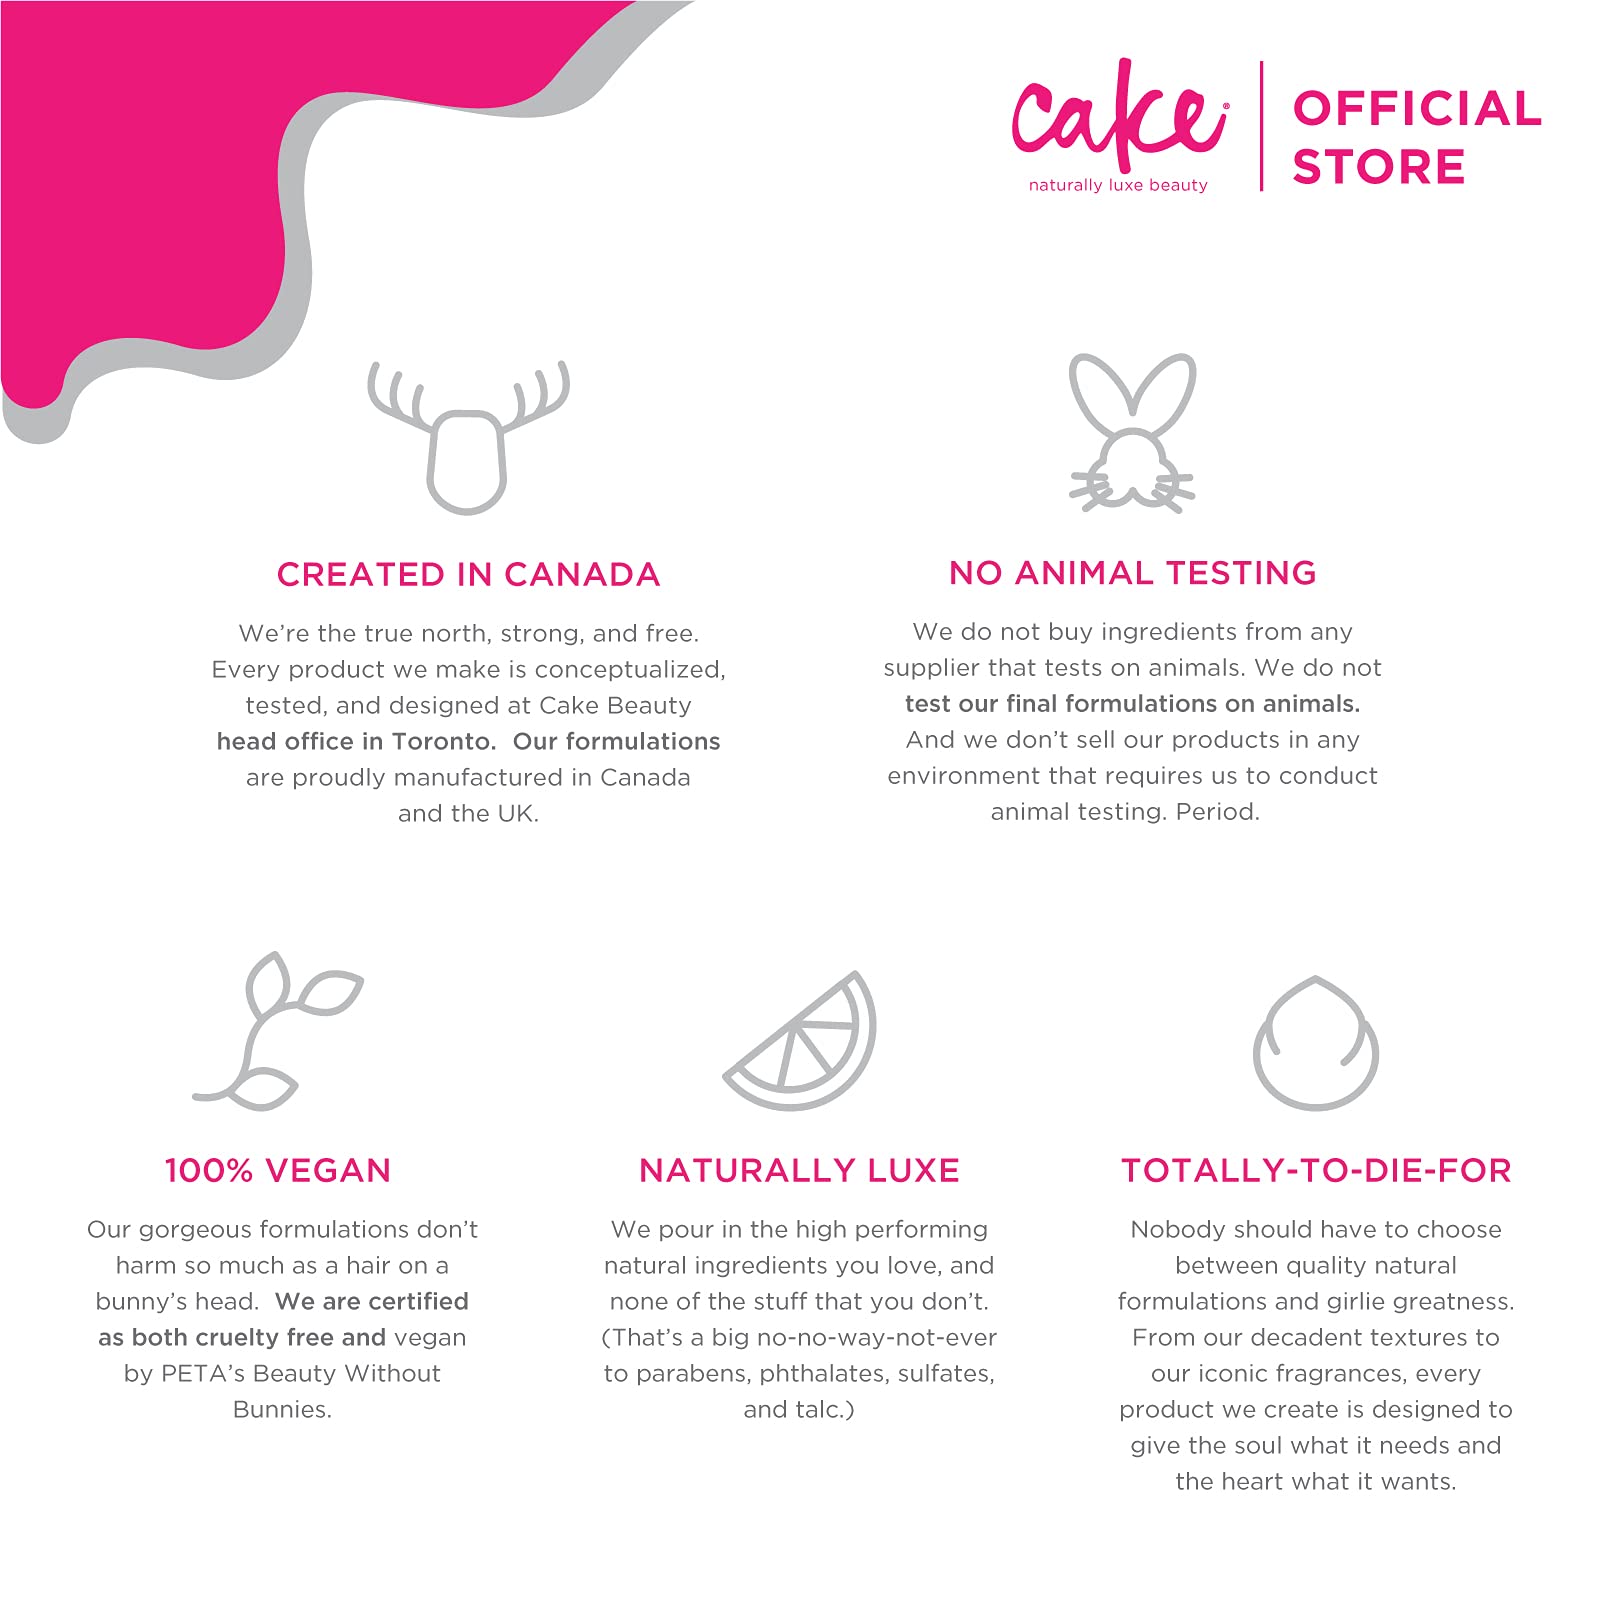 Cake Beauty Vegan Body Cream Body Lotion for Dry Skin - Oat Milk, Shea Butter & Marshmallow Root - Sulfate Free, Paraben Free & Cruelty Free Body Butter Balm Lotion & Moisturizer, 7 Ounce (Pack of 1)